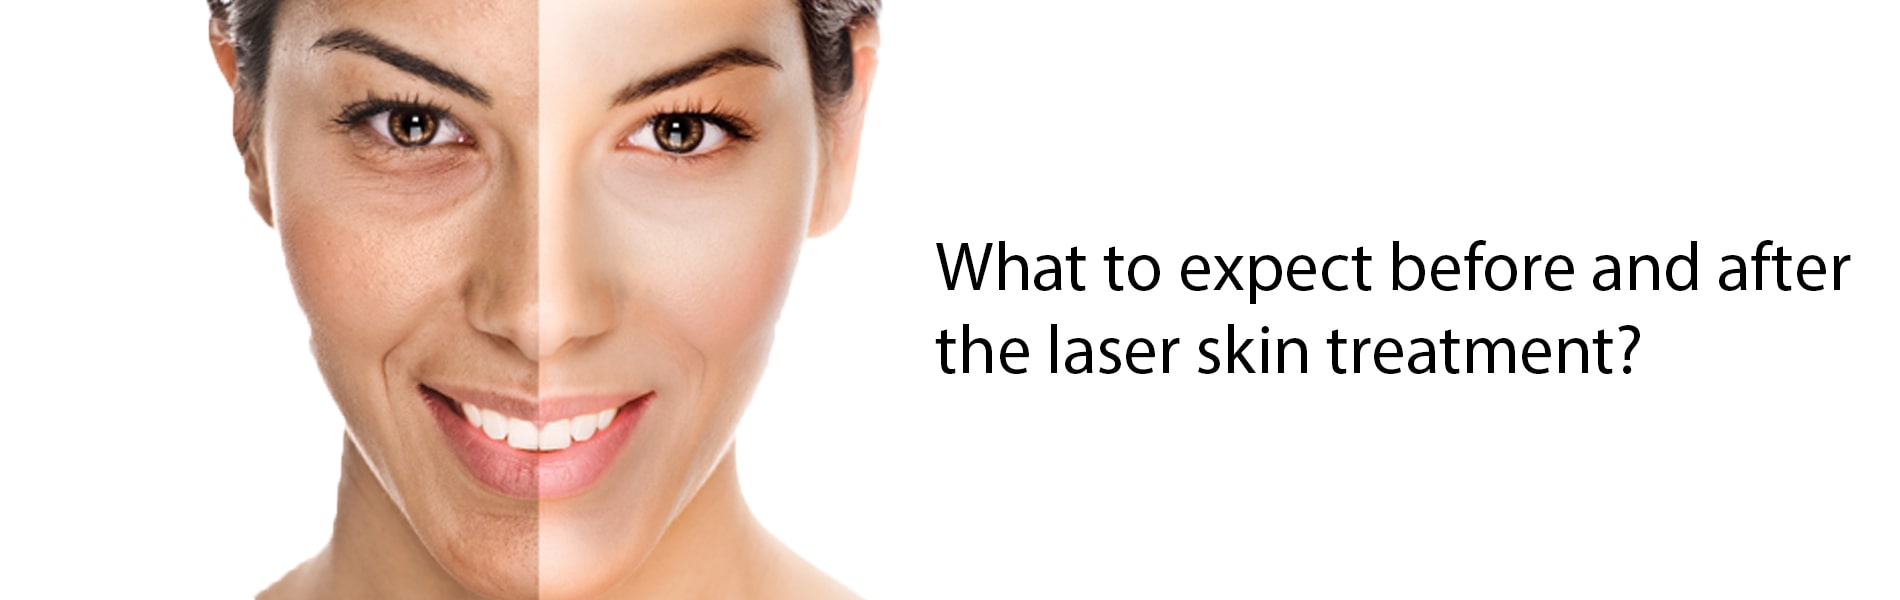 What to expect before and after the laser skin treatment?